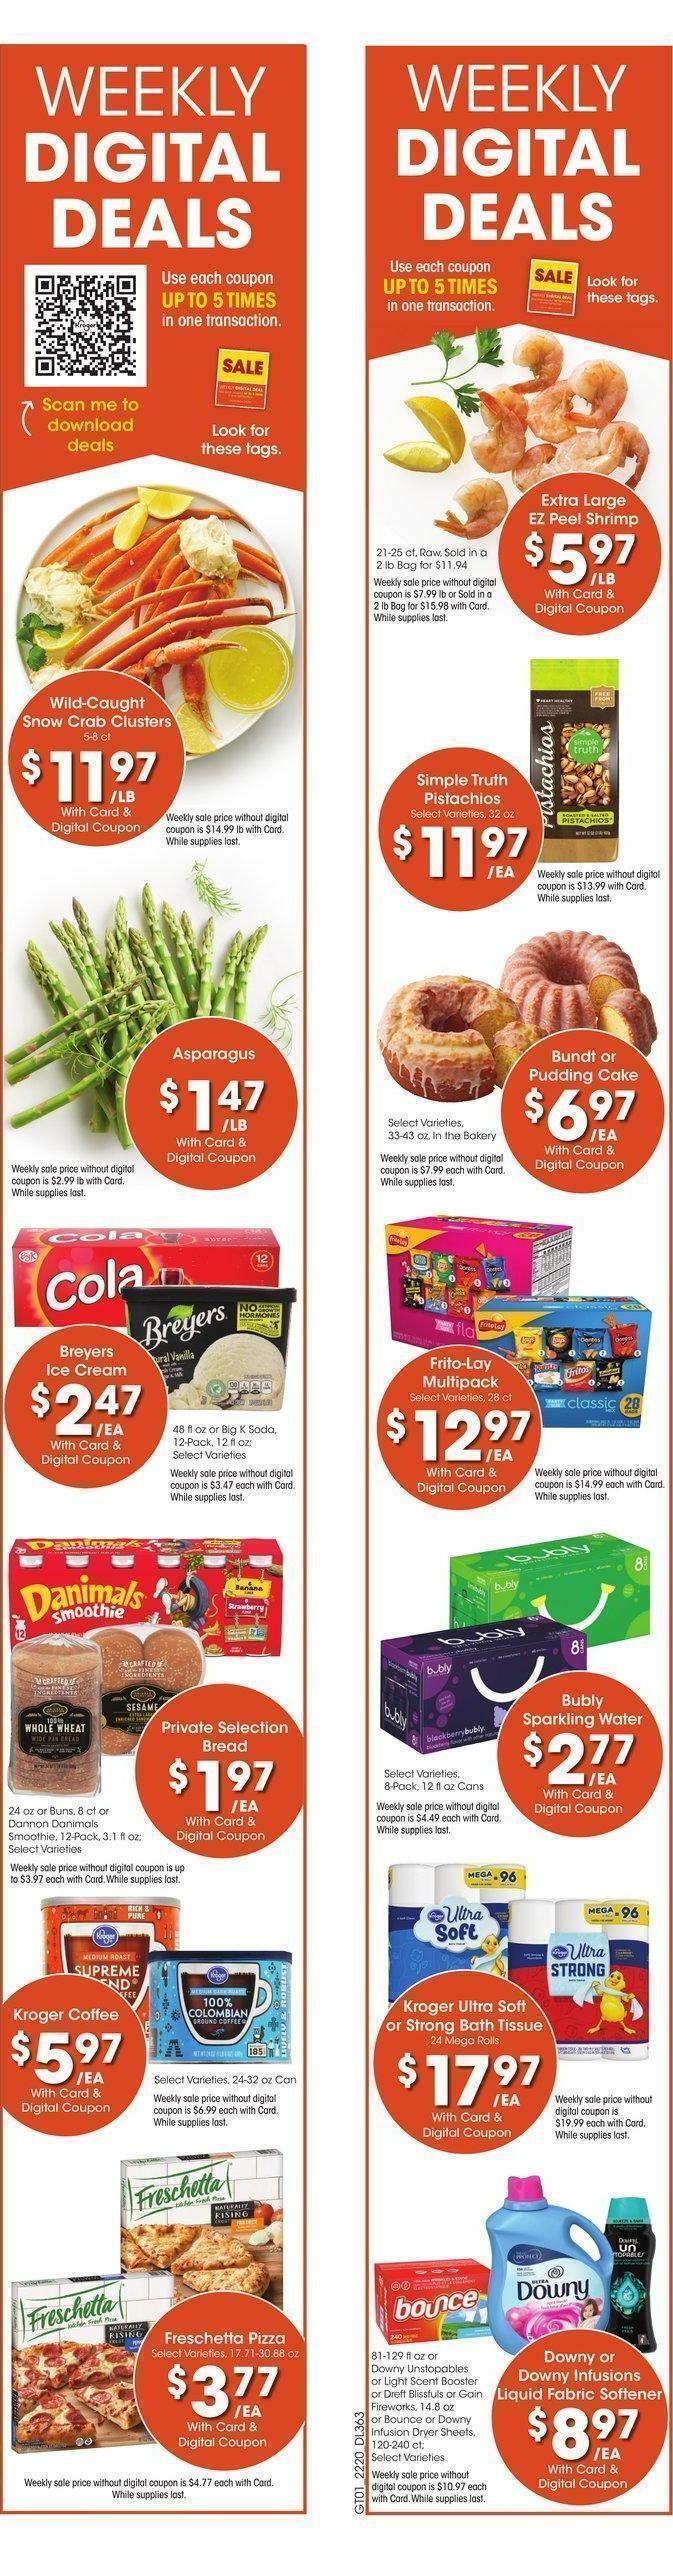 Kroger Weekly Ad from June 15